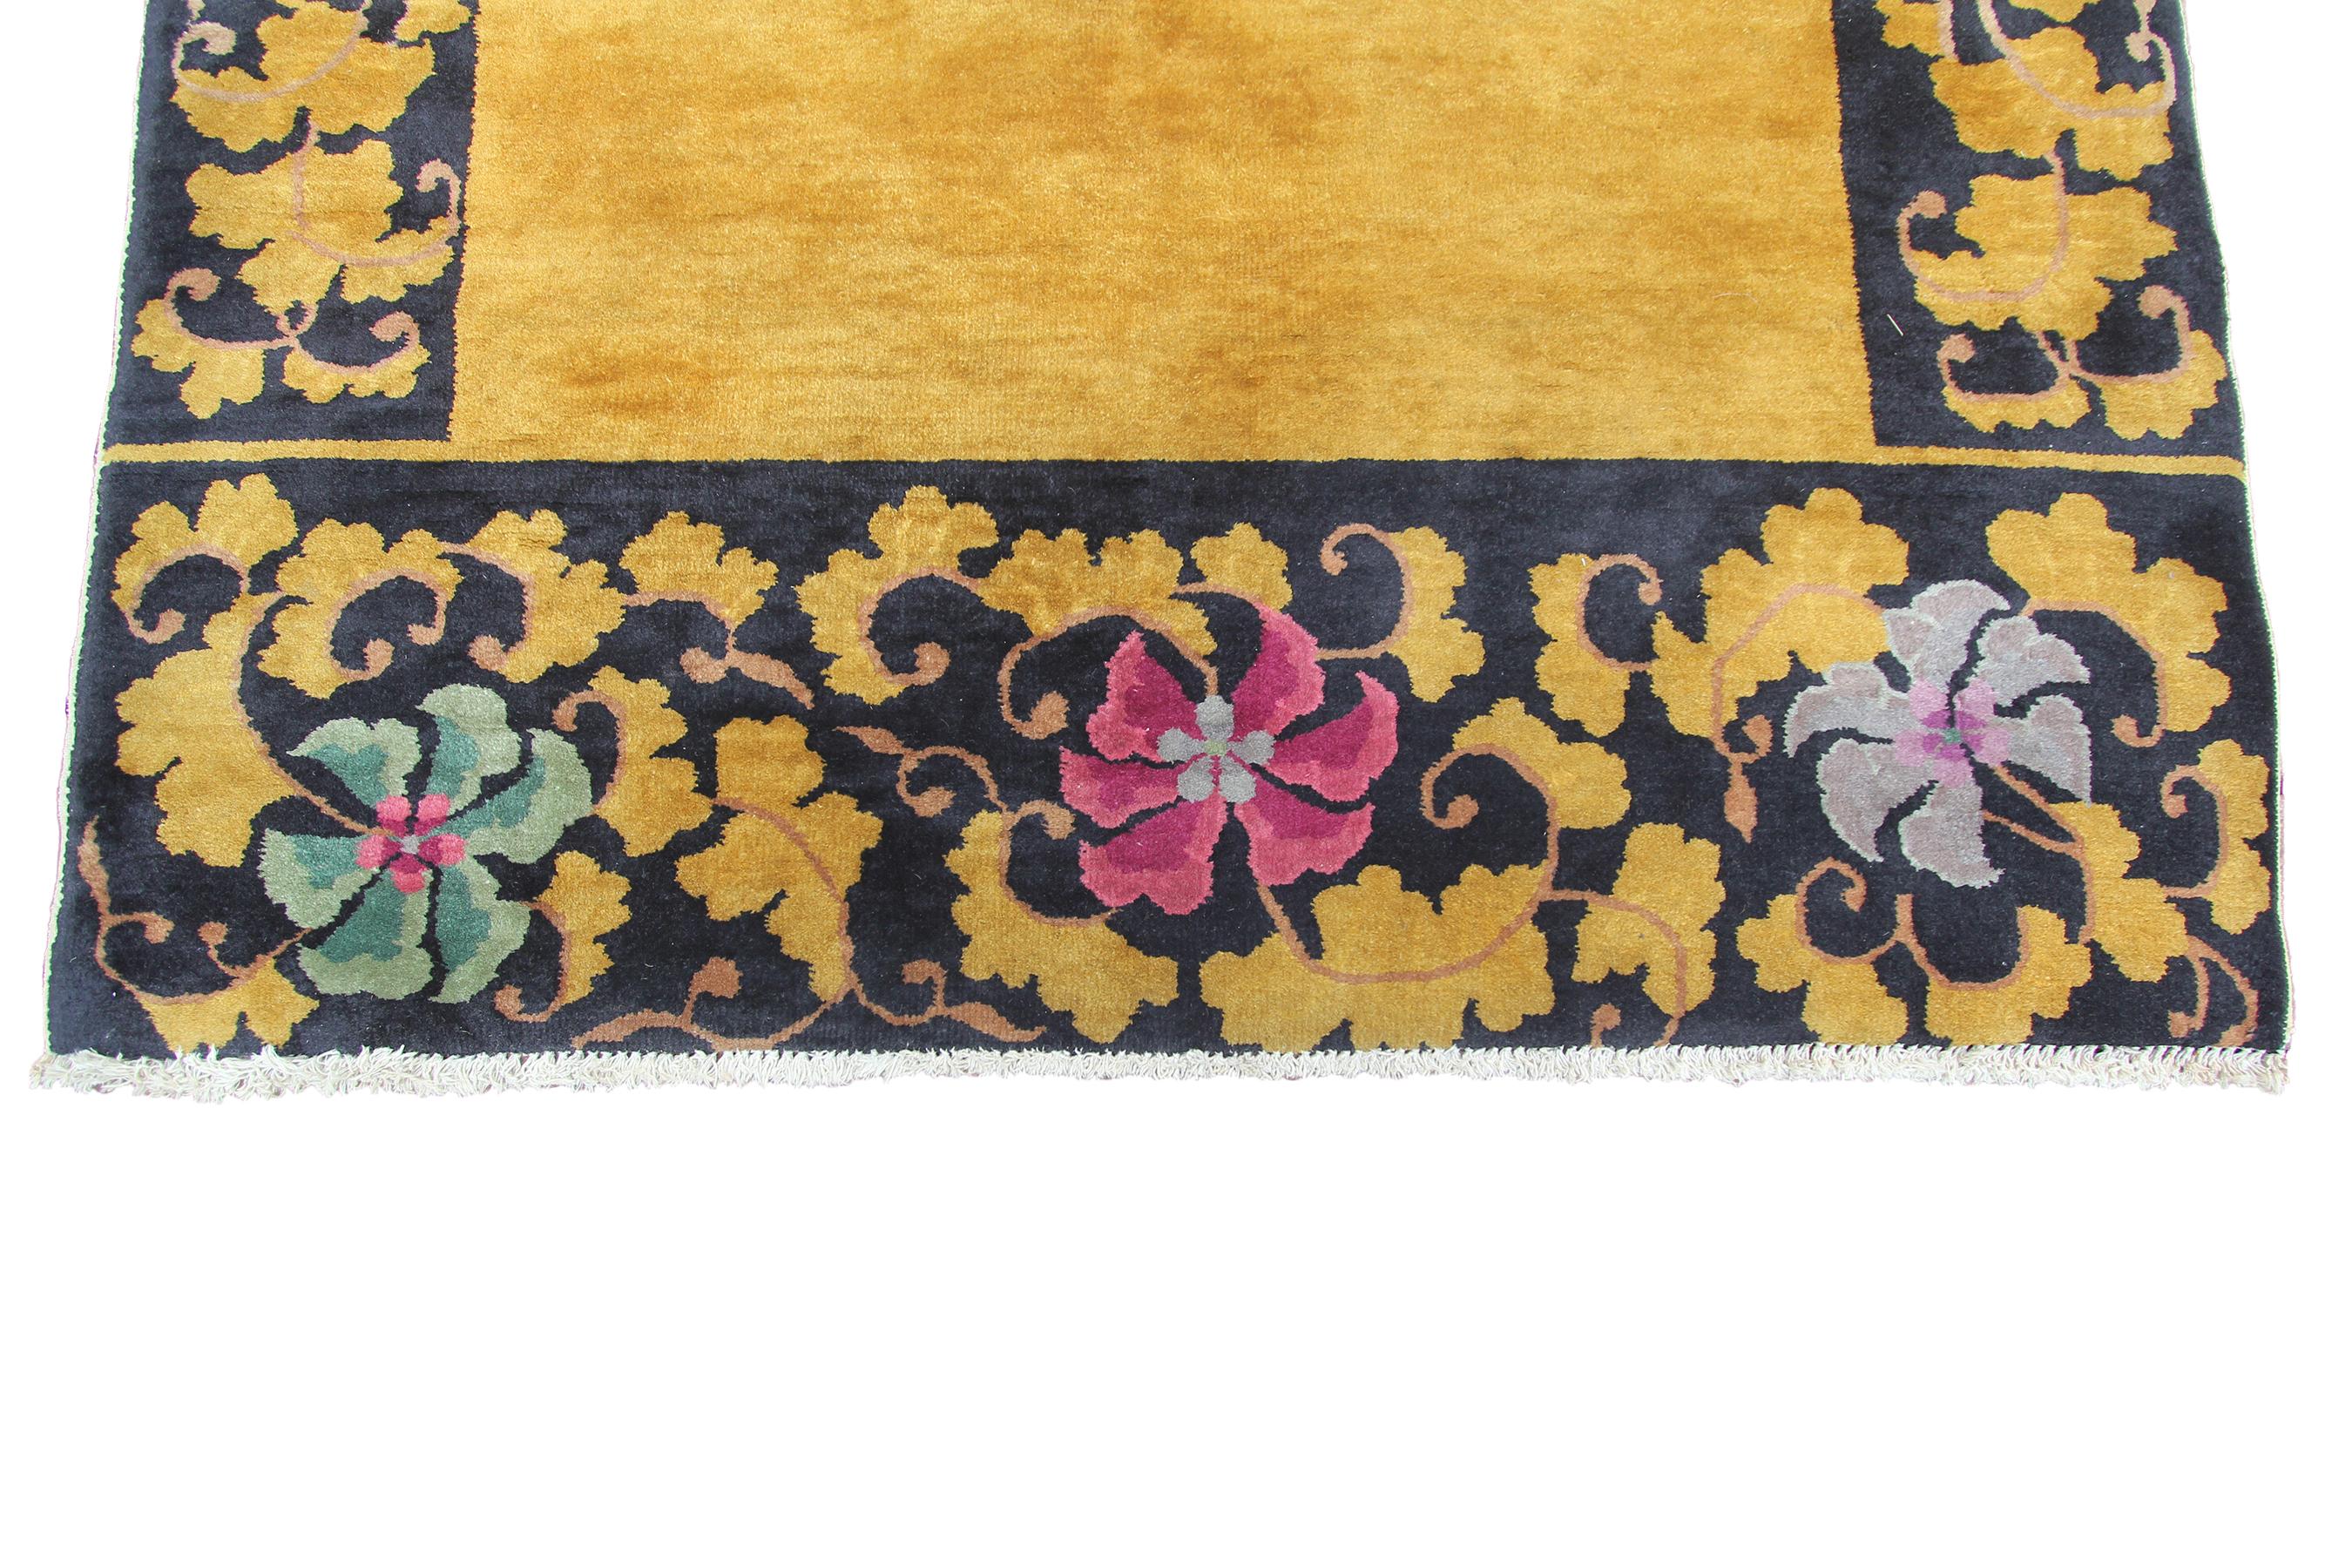 Gold Antique Art Deco Rug Antique Chinese Rug Walter Nichols Black 4x7 122x203cm In Good Condition For Sale In New York, NY